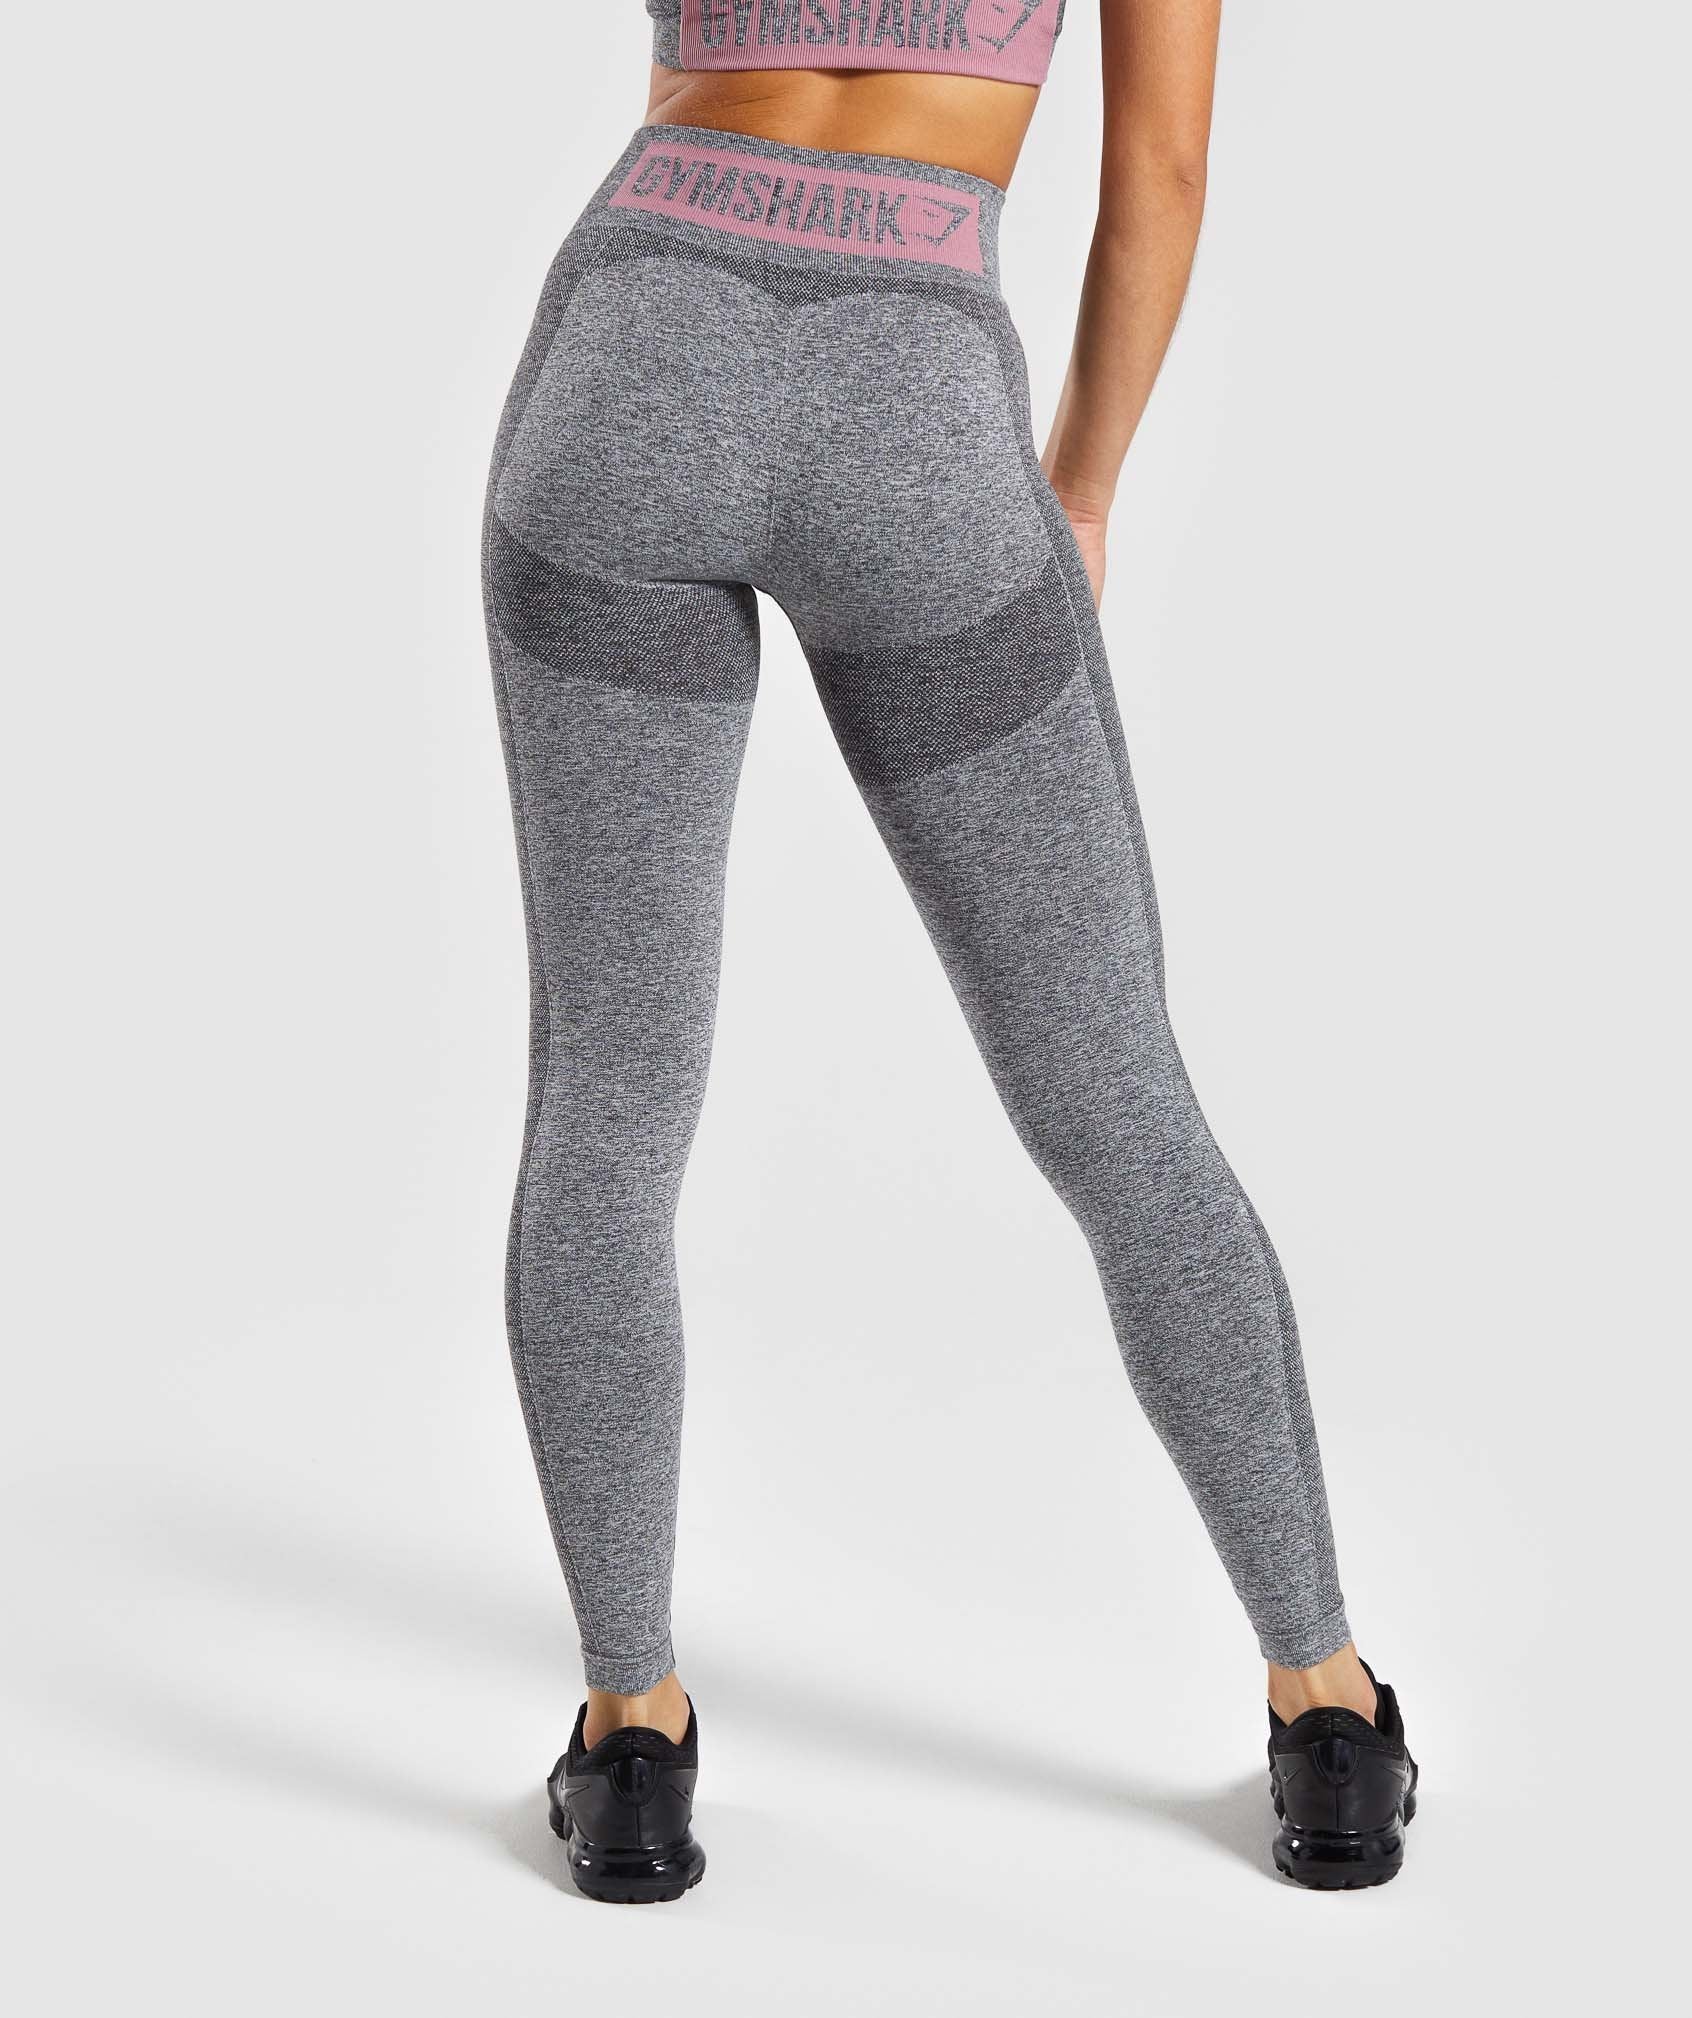 Gymshark Flex High Waisted Leggings Size XS - $40 (20% Off Retail) New With  Tags - From Gabby